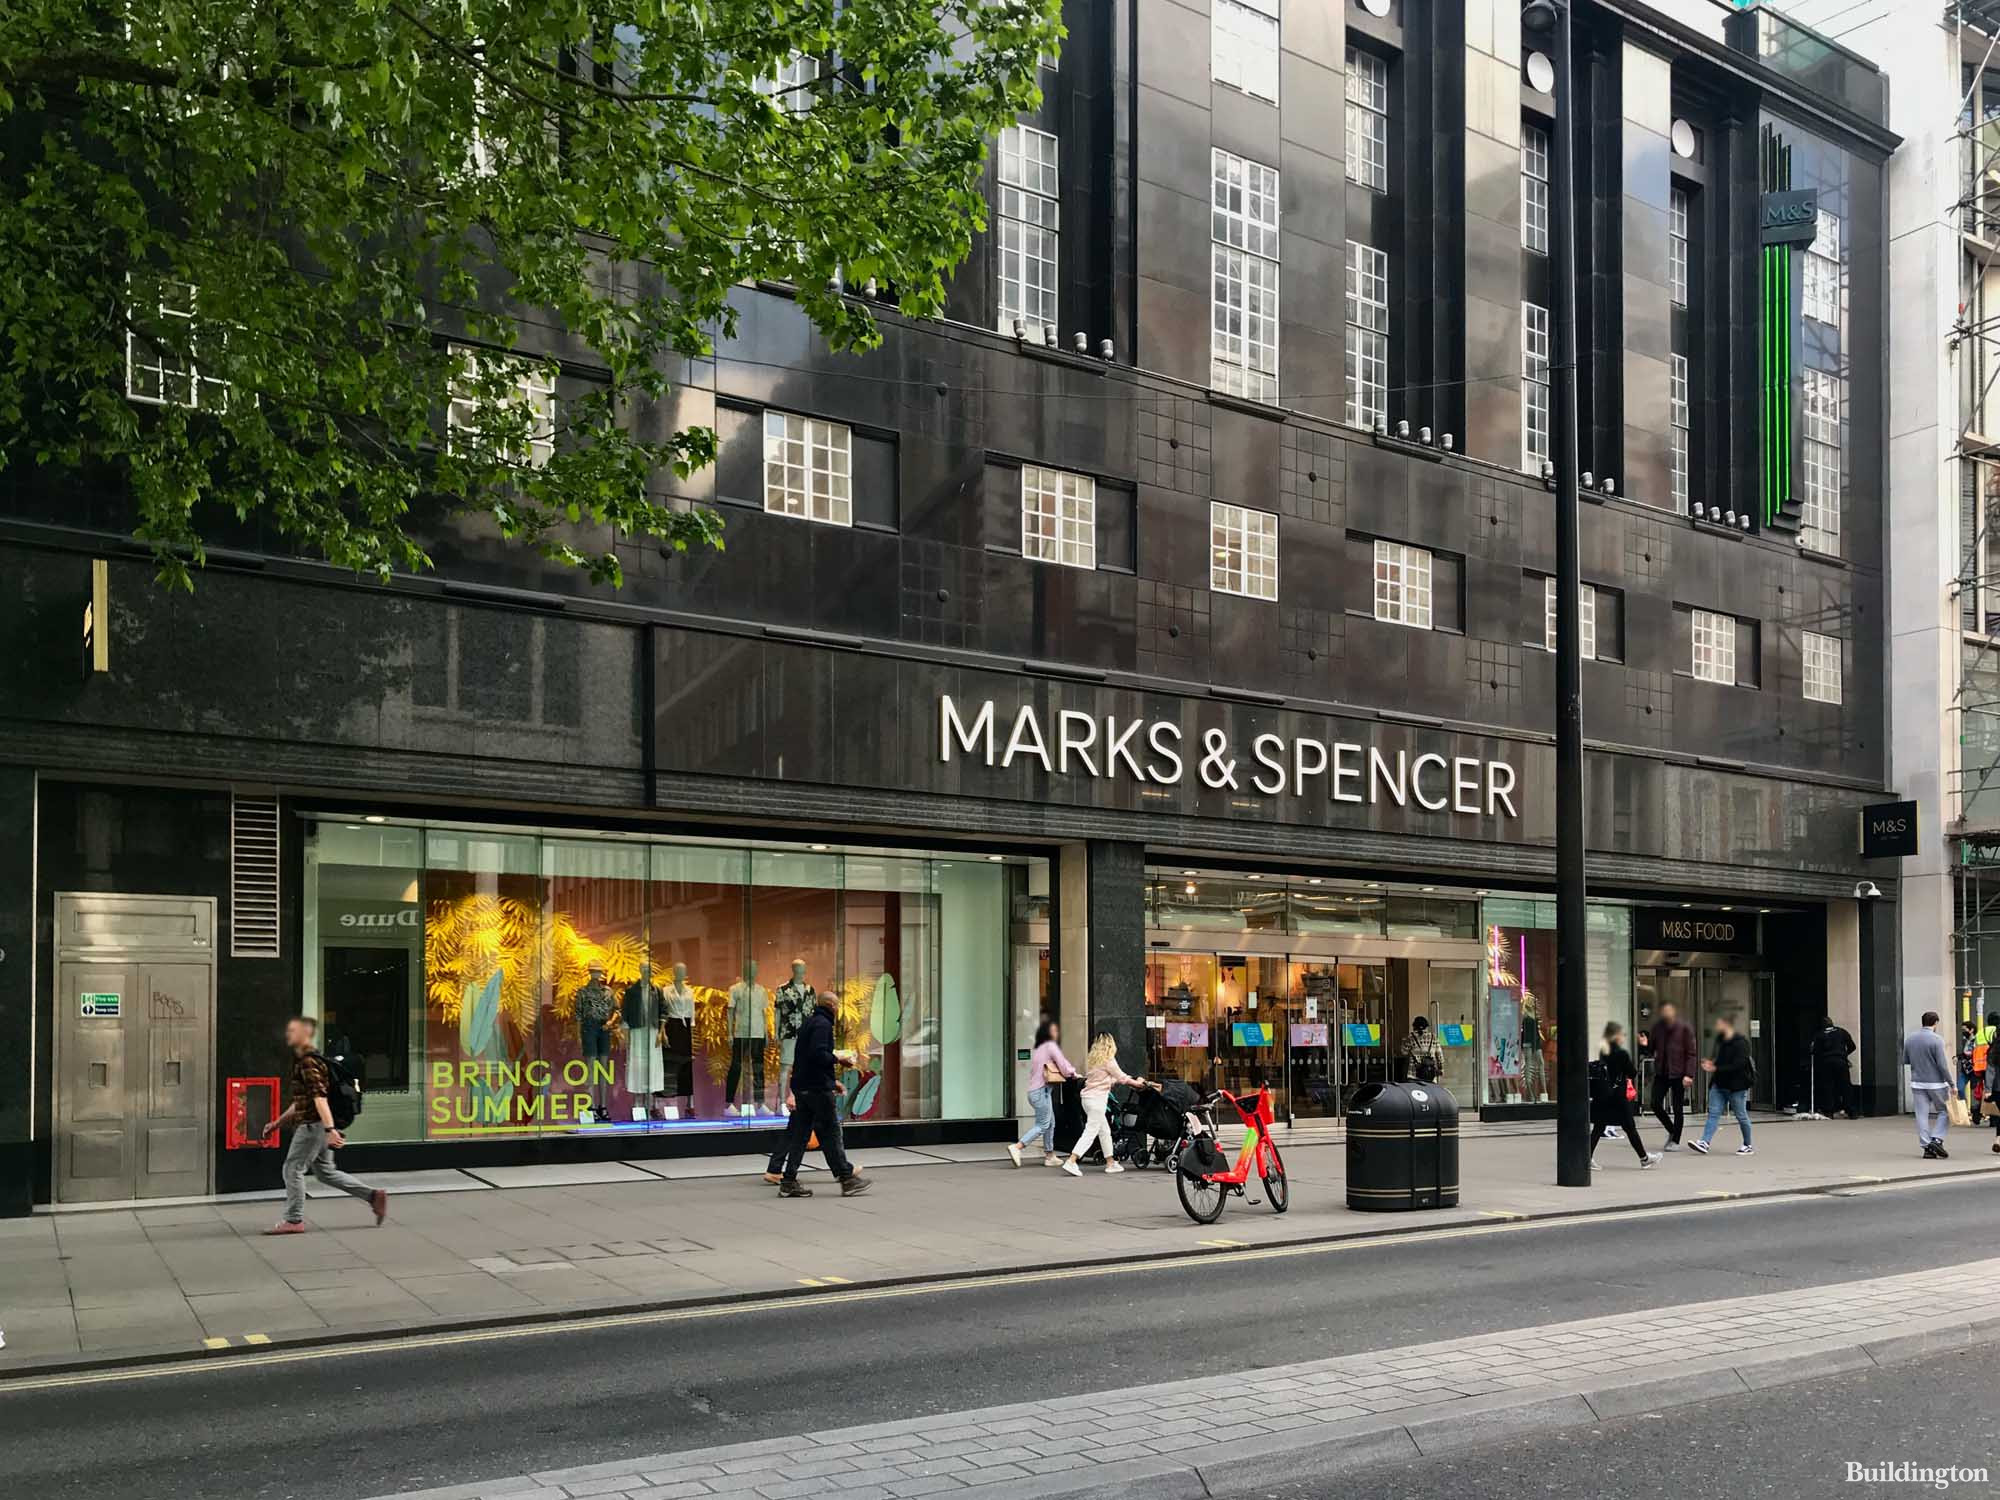 Marks & Spencet at The Pantheon building at 169-173 Oxford Street in London W1.